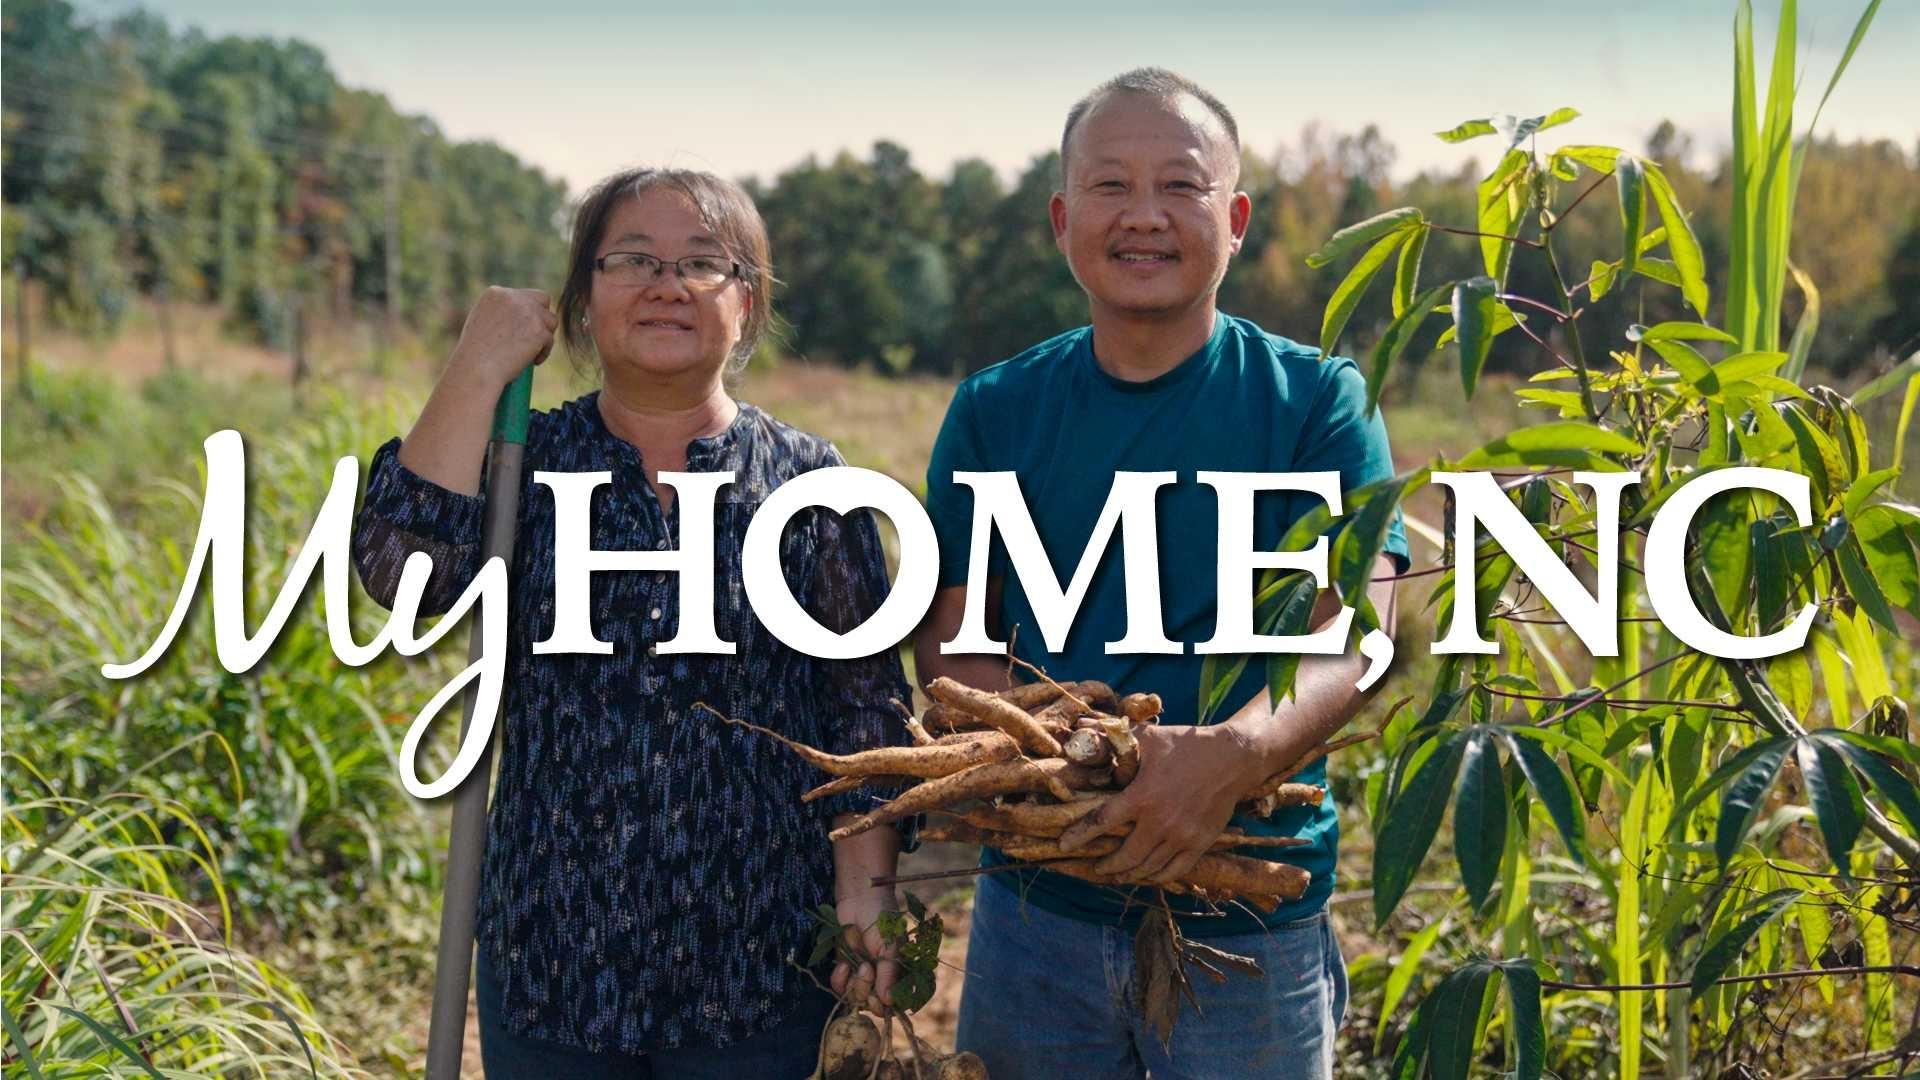 Two farmers stand side by side in a rice field with the "My Home NC" logo over the image